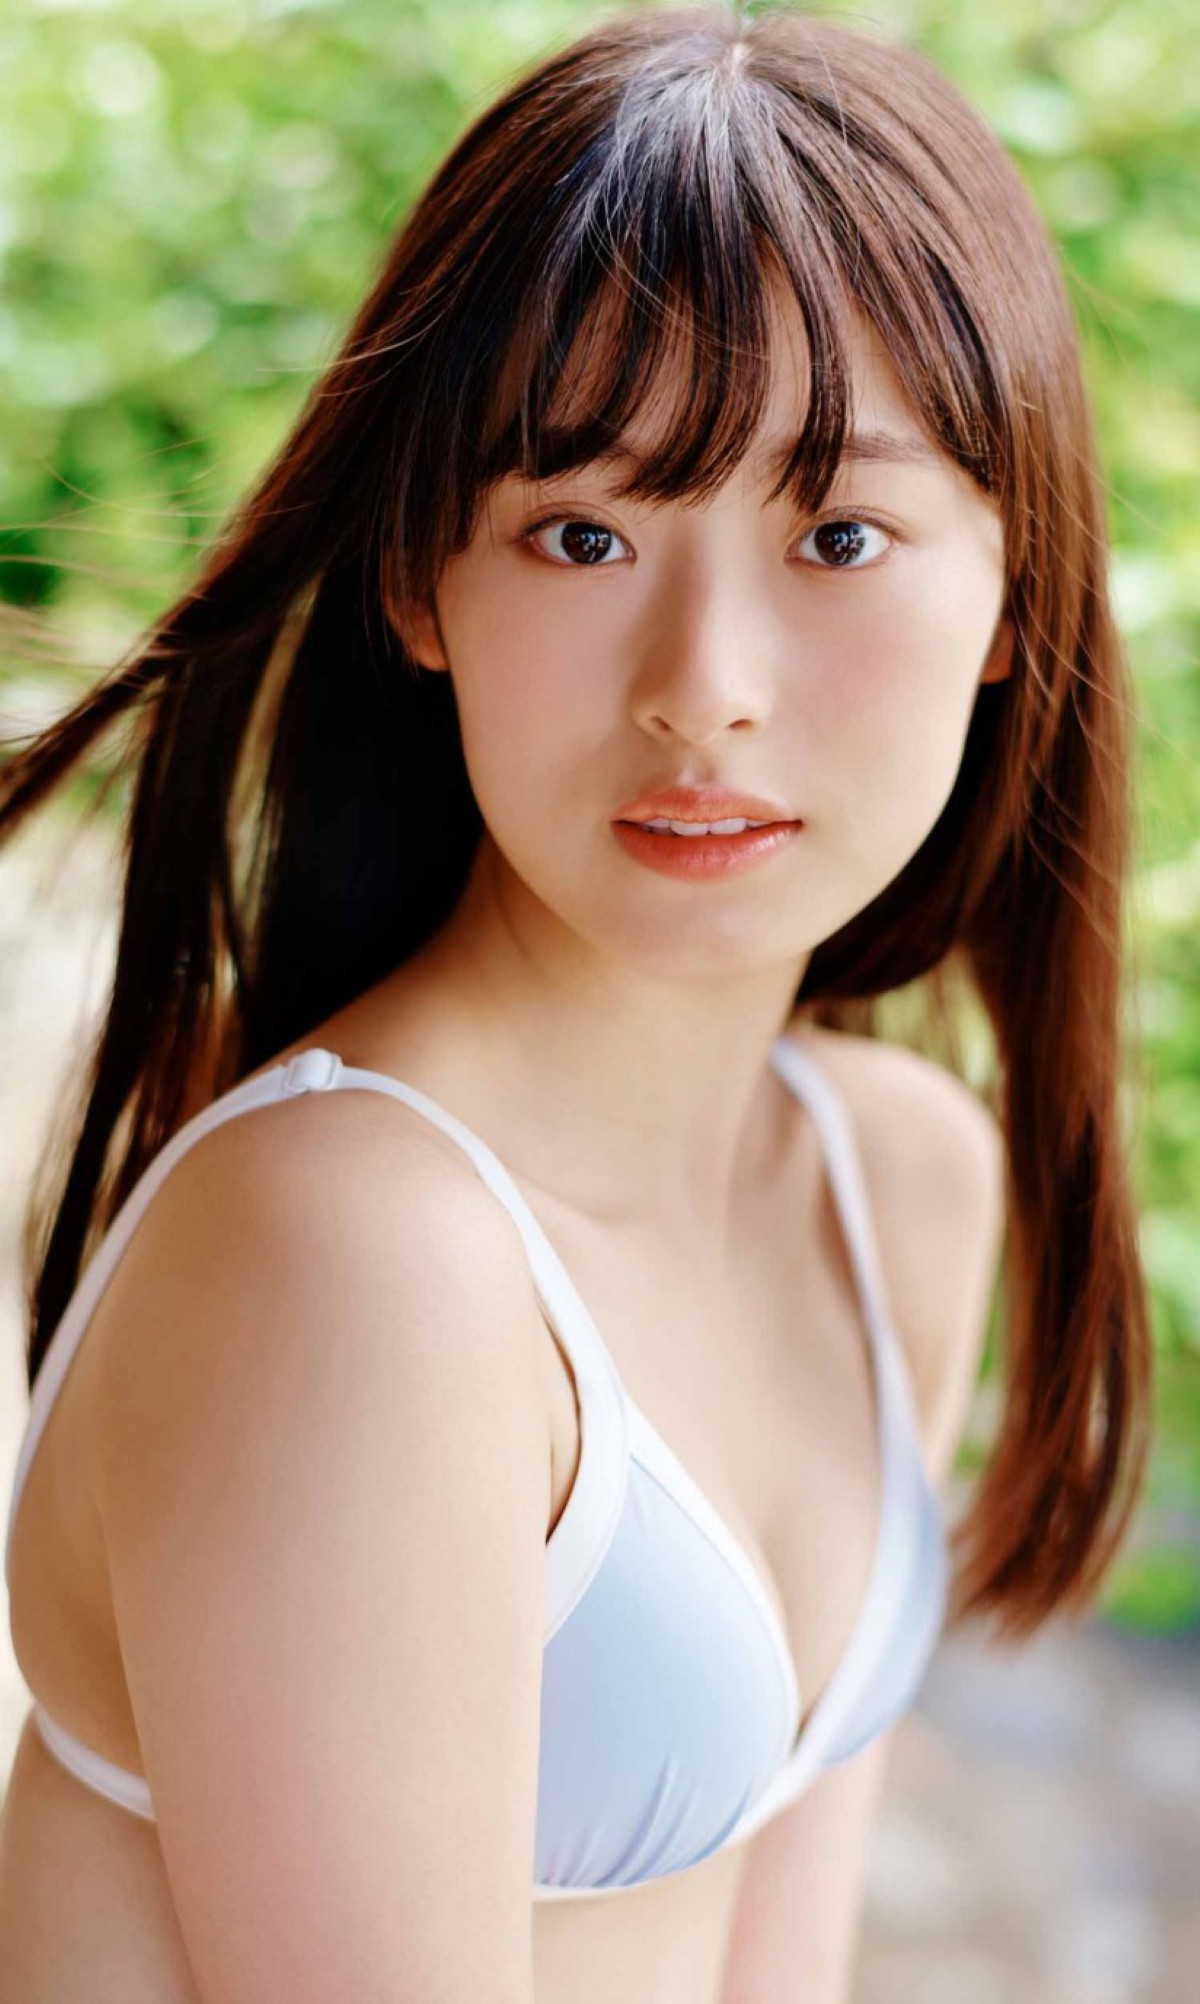 Photobook Ayaka Imoto 井本彩花 The Heroine Is Dignified And Beautiful 17 Years Old 0029 8290930160.jpg